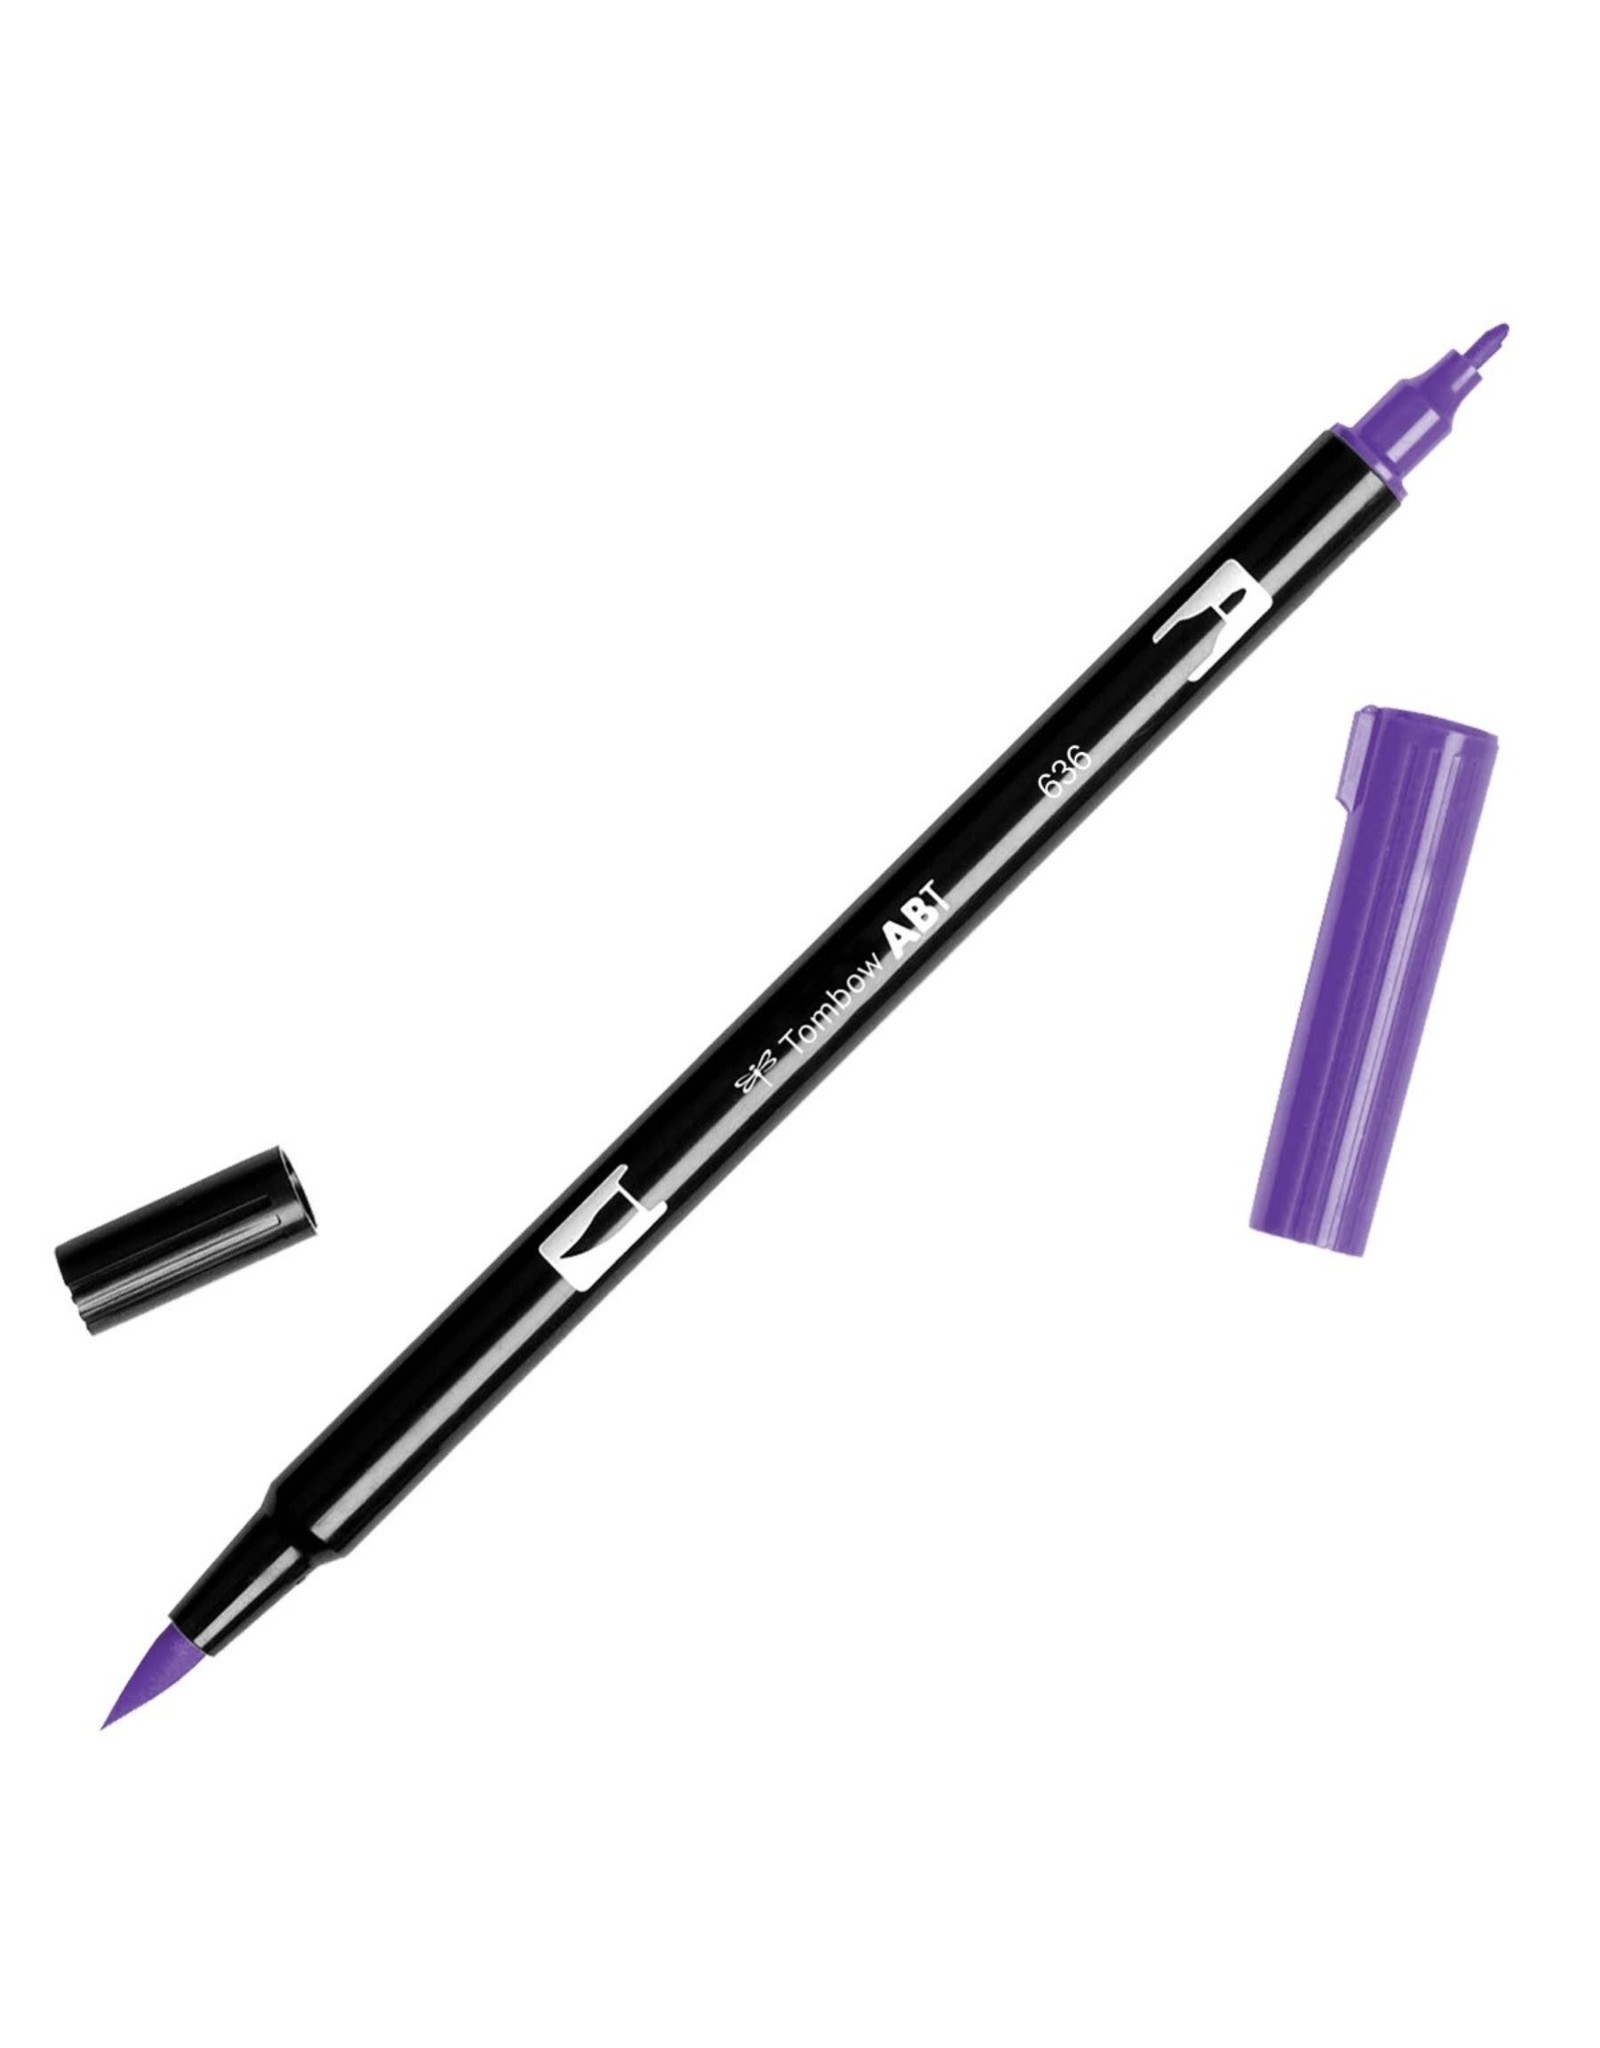 TOMBOW TOMBOW ABT-636 IMPERIAL PURPLE DUAL BRUSH MARKER